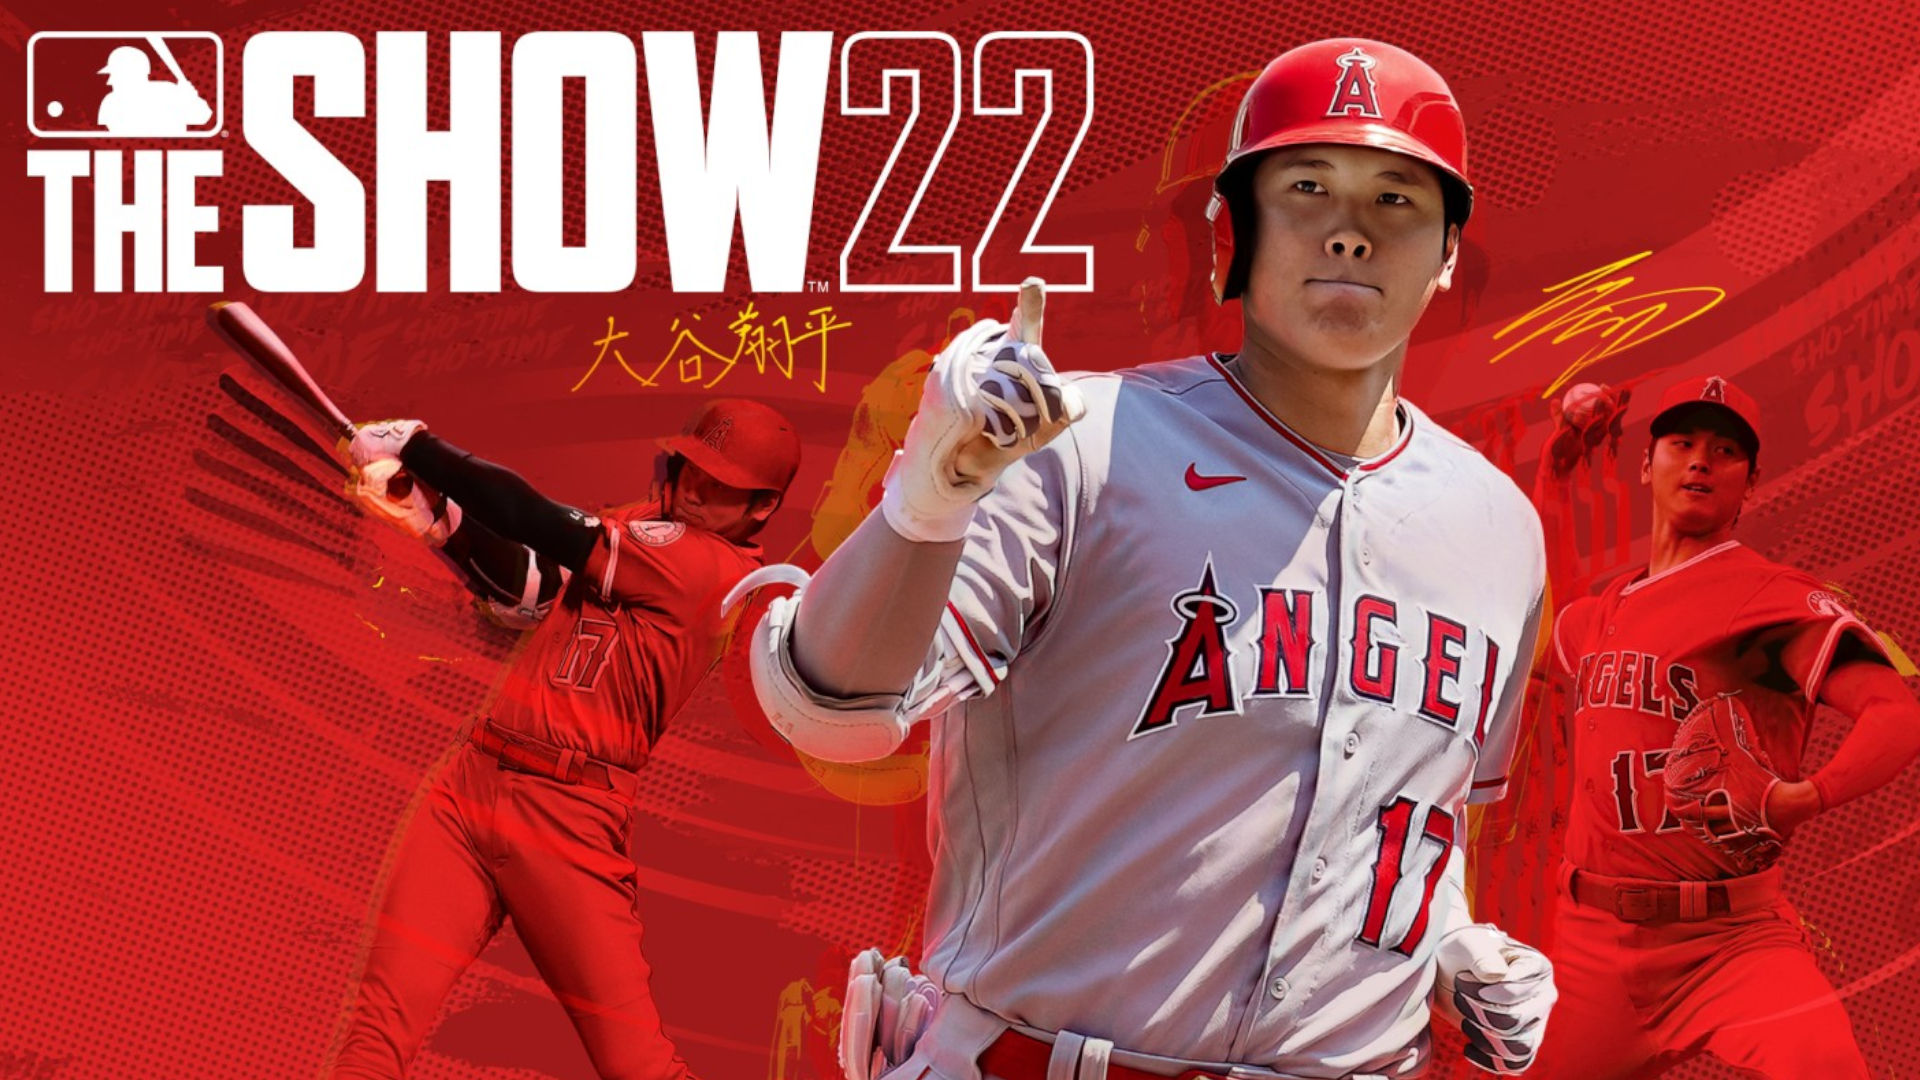 MLB the Show 22, the official baseball game of the MLB